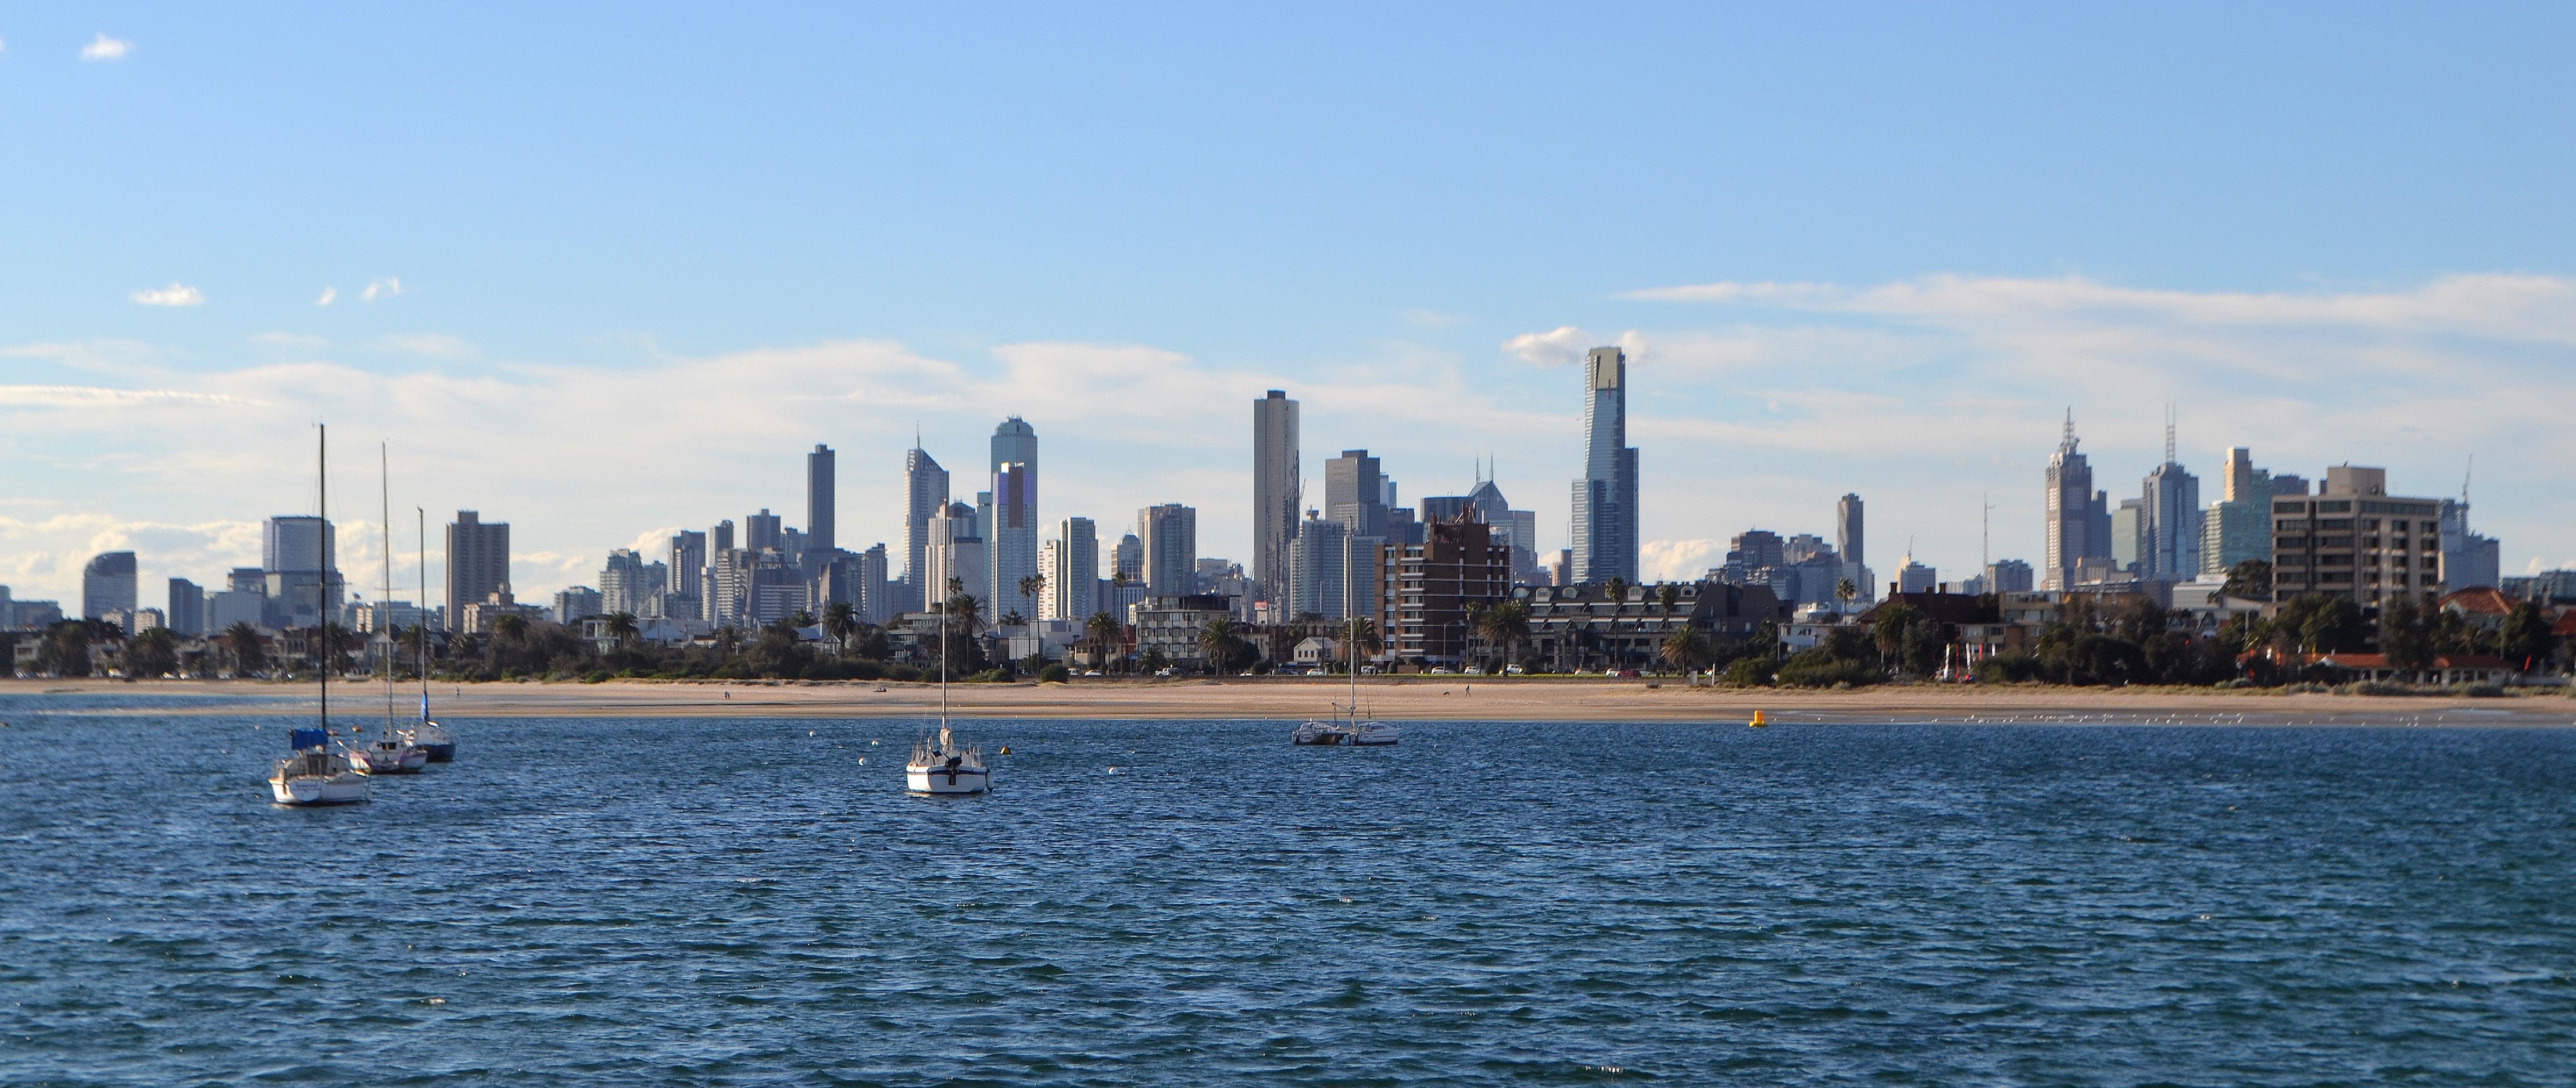 The view of the Melbourne skyline from St. Kilda is beautiful.